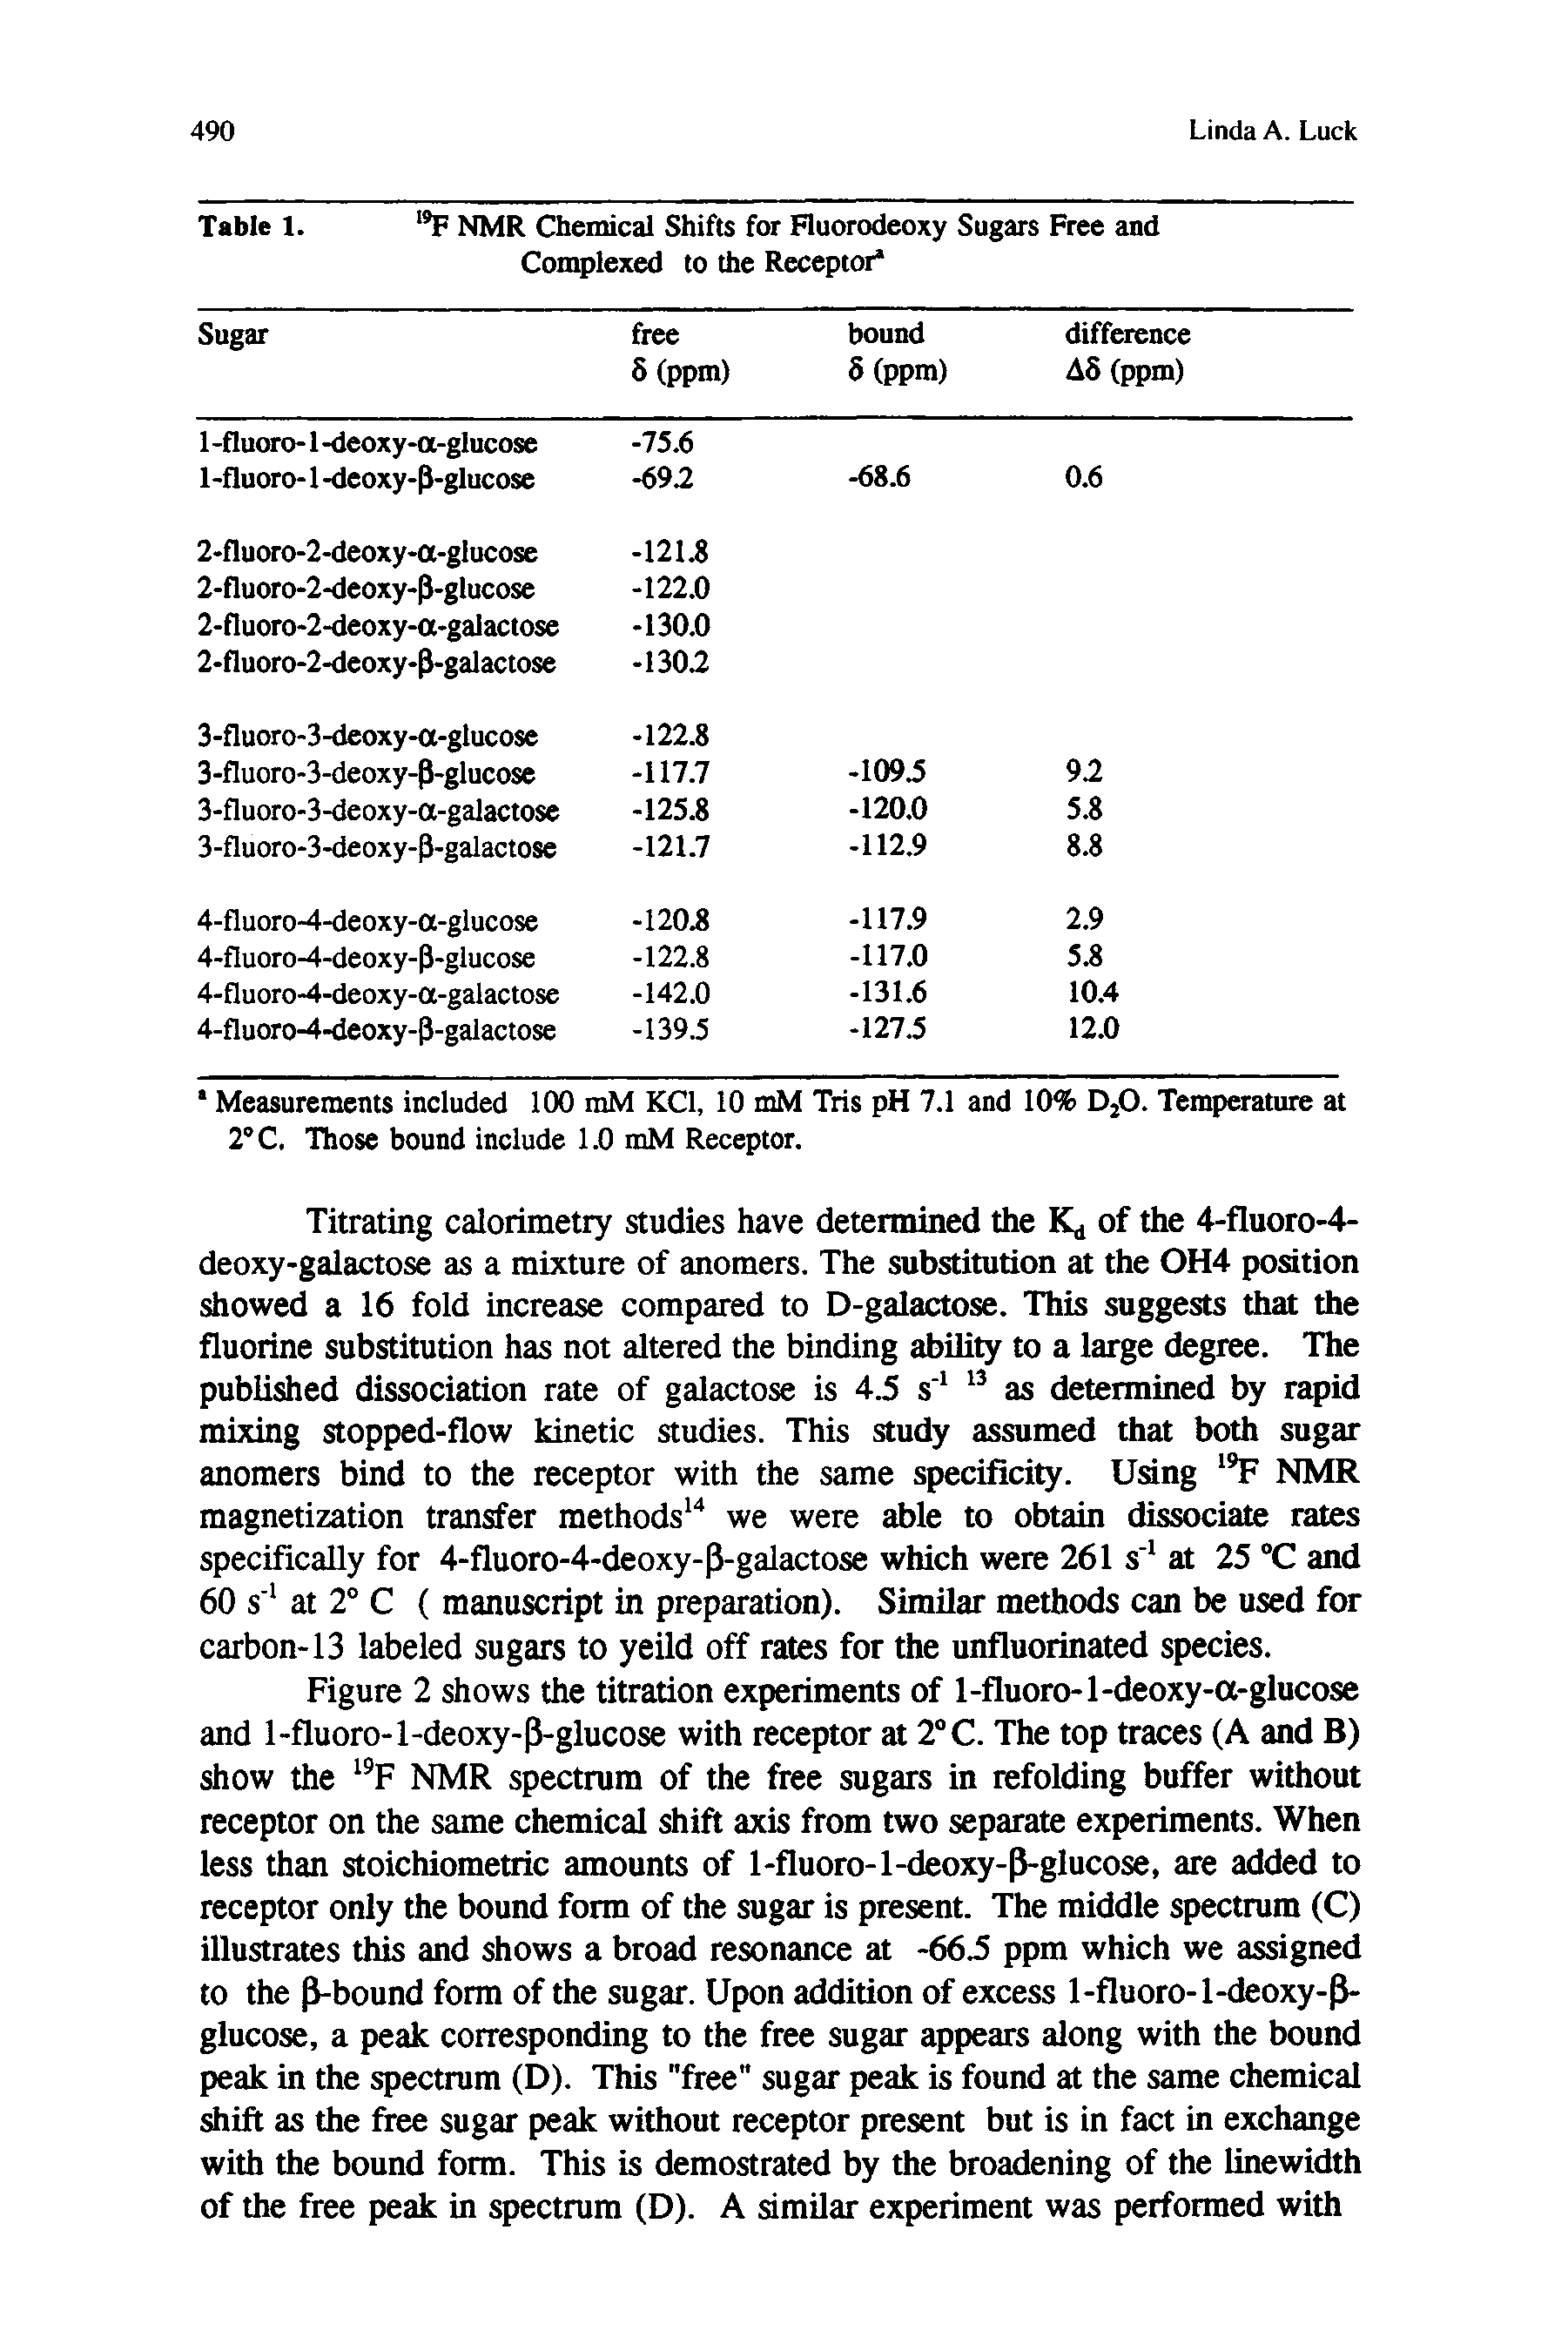 Table 1. F NMR Chemical Shifts for Fluorodeoxy Sugars Free and Complexed to the Receptor ...